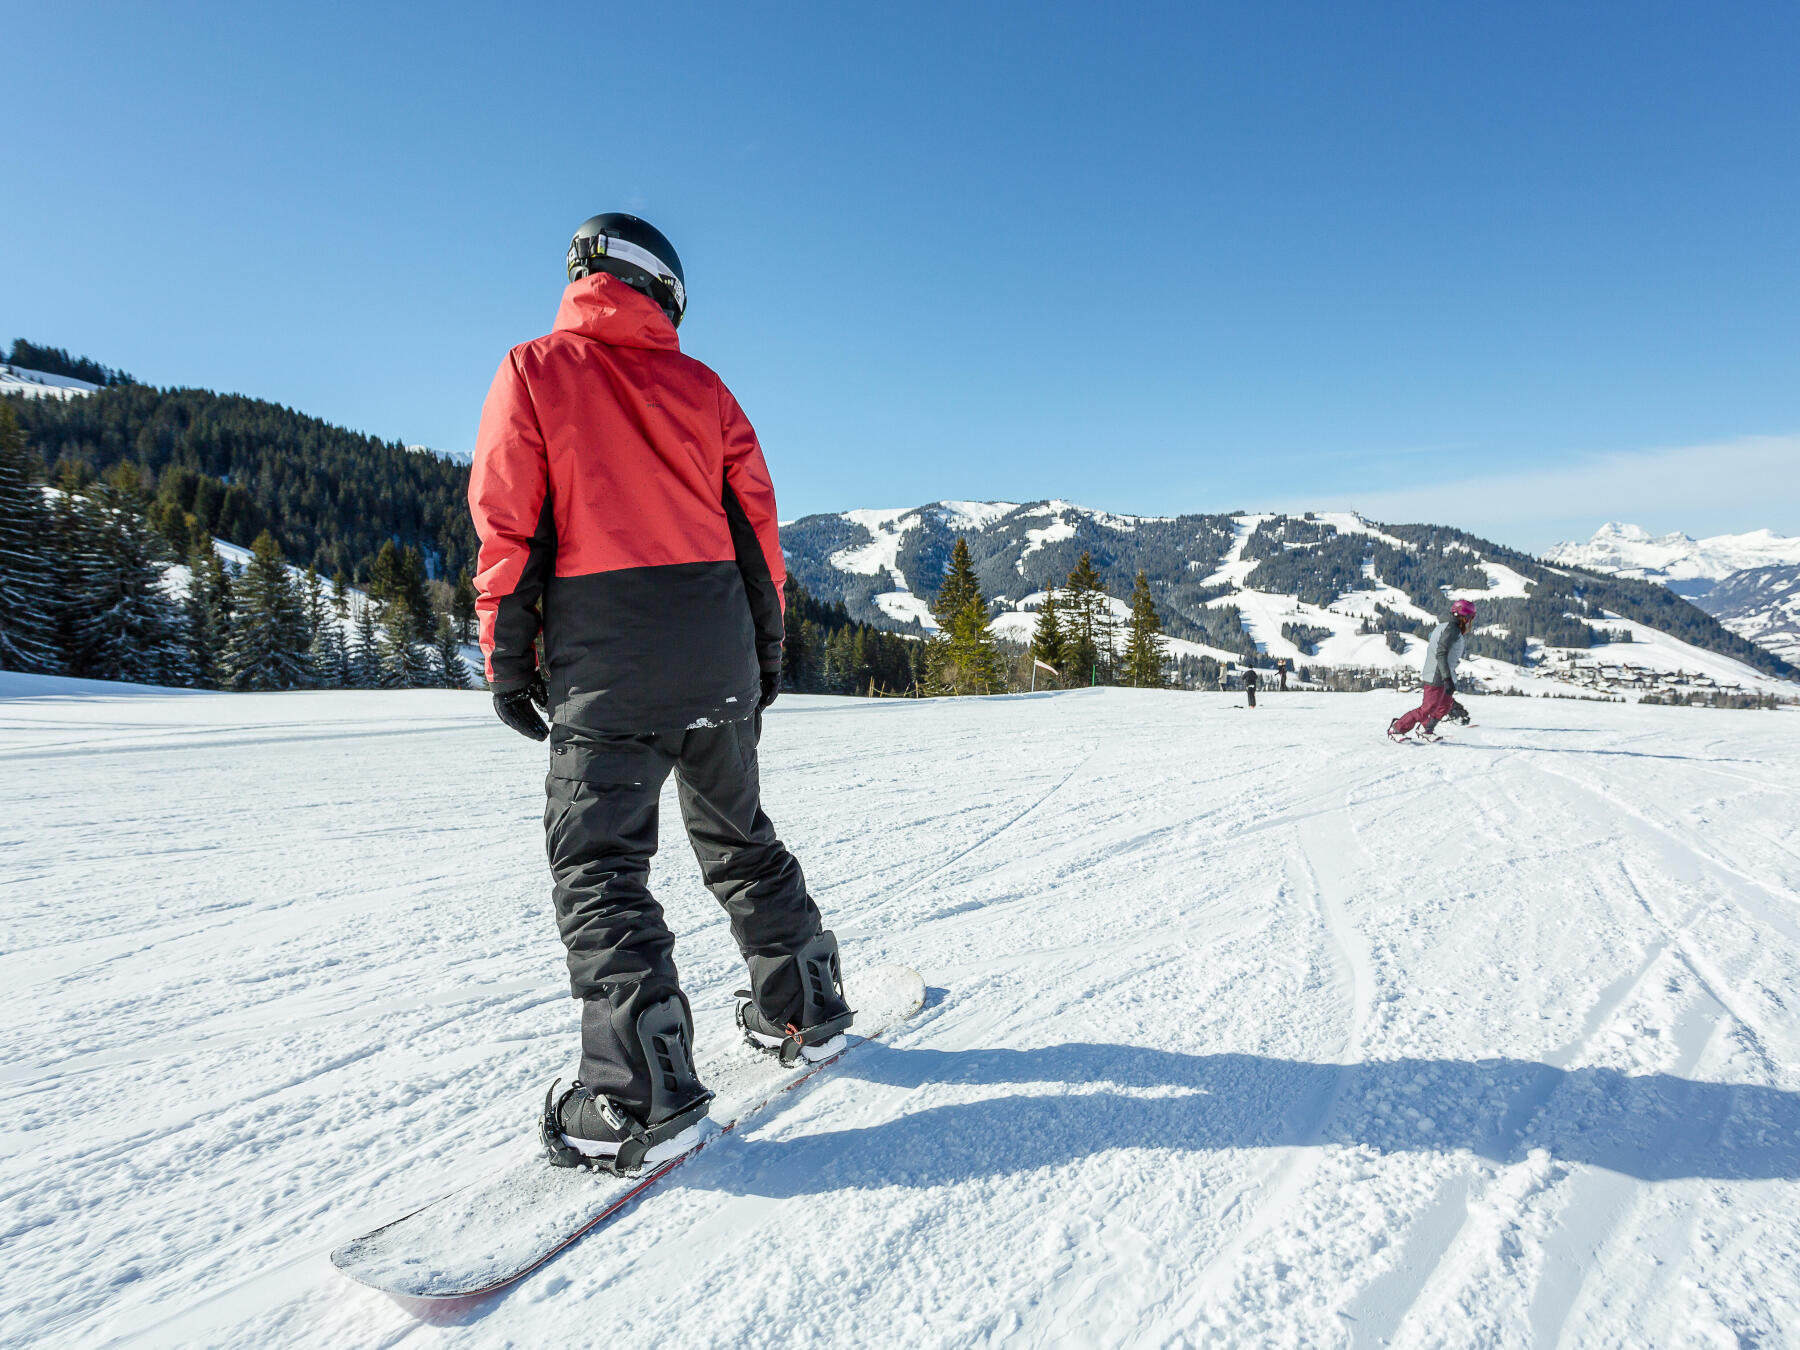 Winter sports: how to choose your ski resort